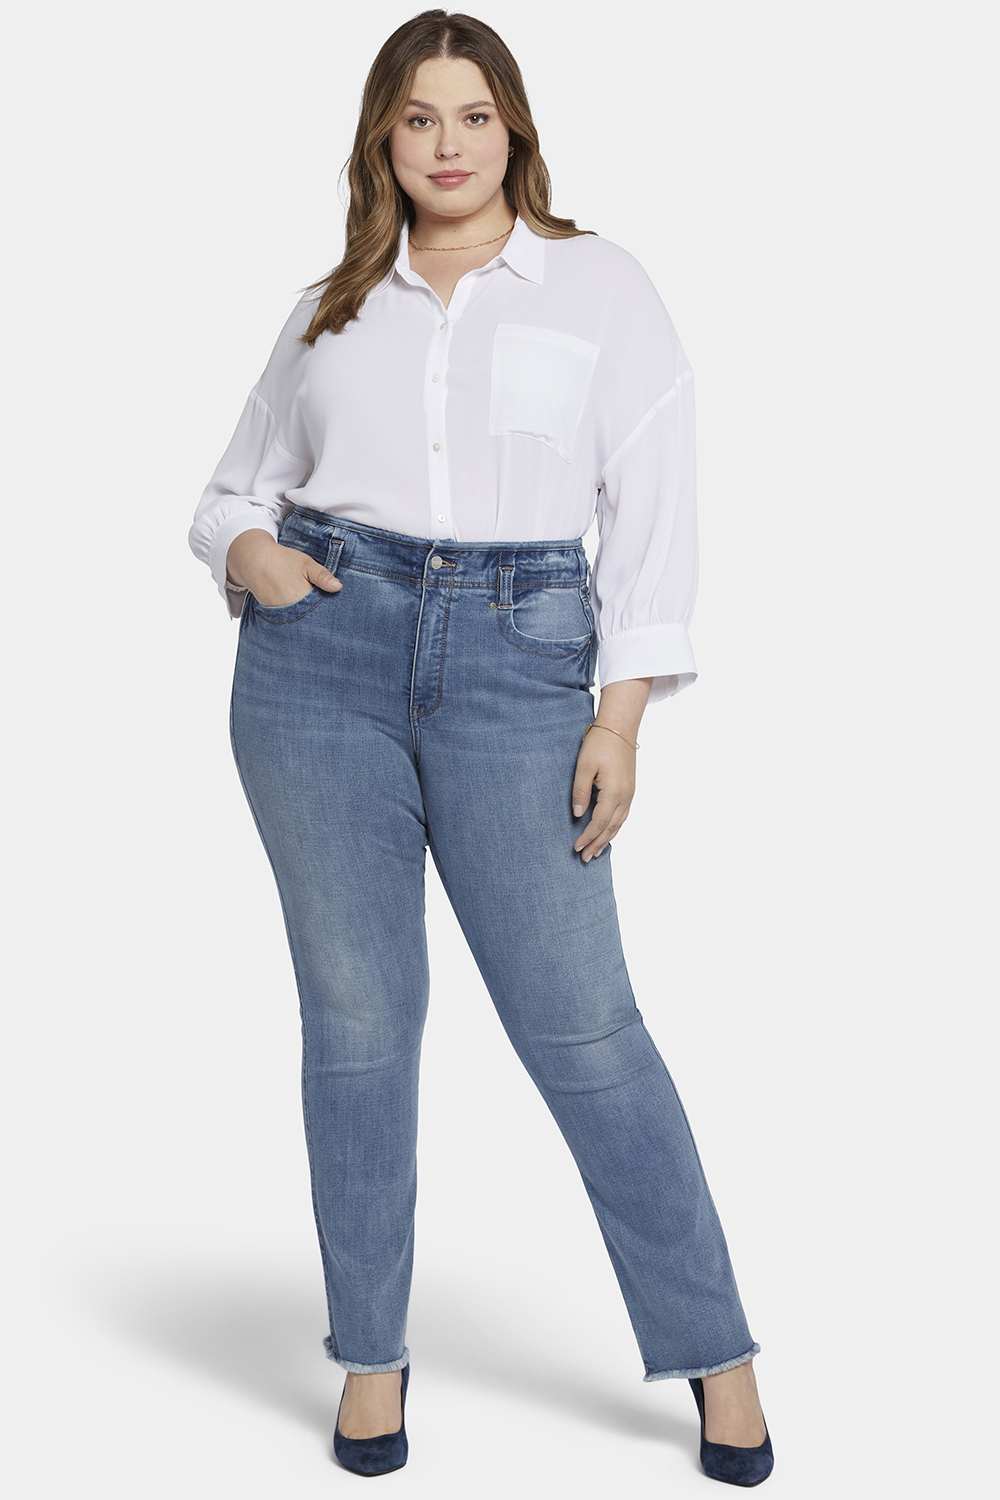 TYIJHITGT plus size pull on pants Wide-Leg Suit Pants High Waist Loose for Women'S  Clothing Full Length Trousers Casual Office Pants Female (Size : Medium)  price in UAE,  UAE